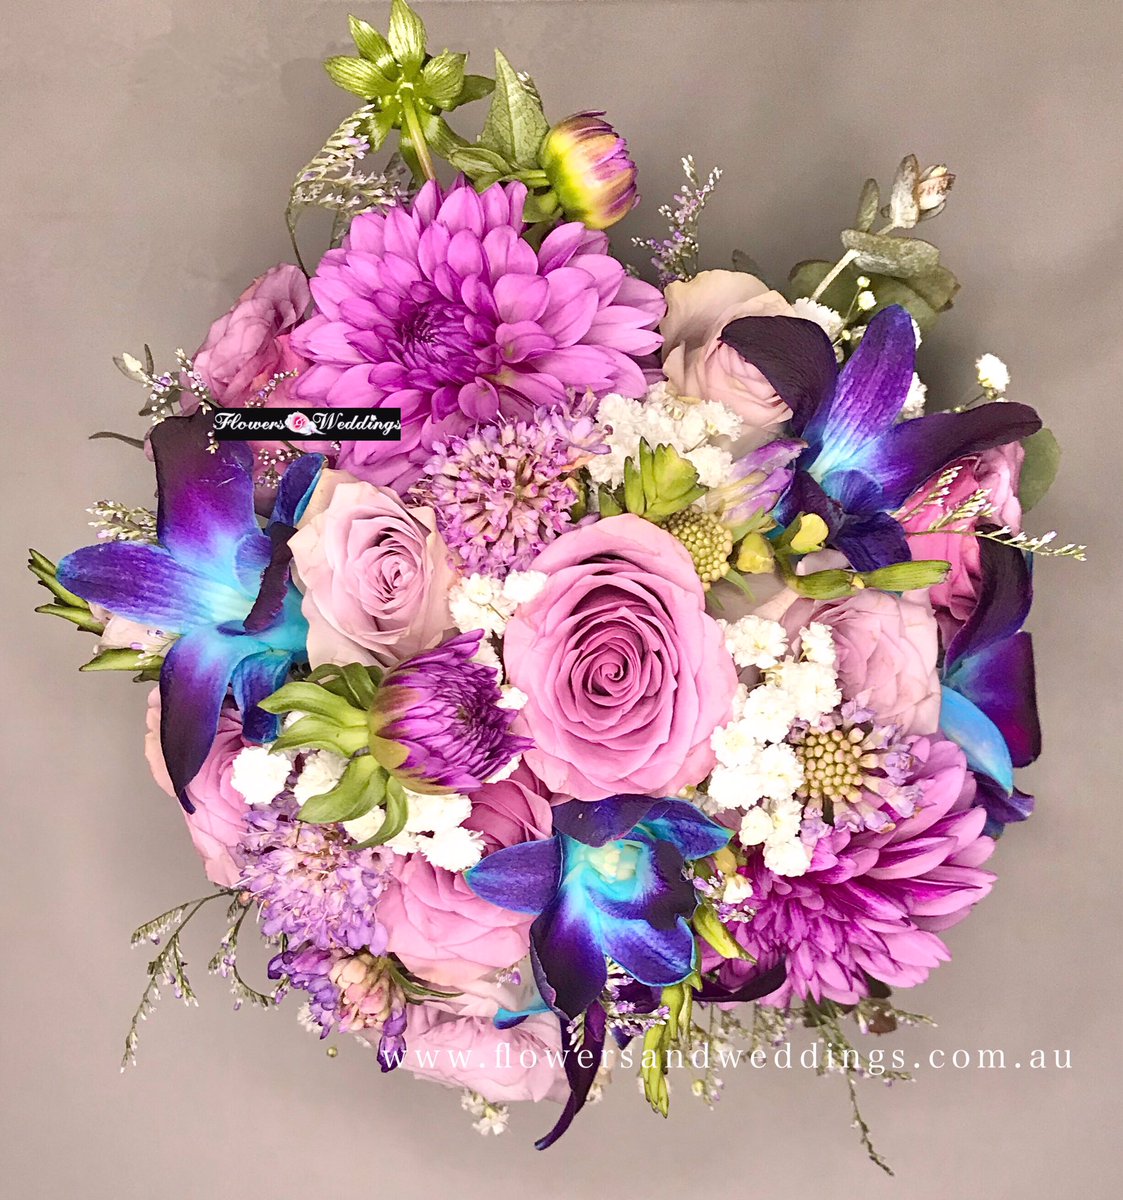 in love with the splash of colour #bouquet #bouquetofflowers #bouquets #bouquetinspo #bouquetofroses #bouquetdefleurs #bouquetoftheday #bouquetwedding #bouquetflower #bridesbouquet #bridesmaidbouquet #bridesmaidbouquets #weddingbouquet #weddingbouquets #weddingday💍